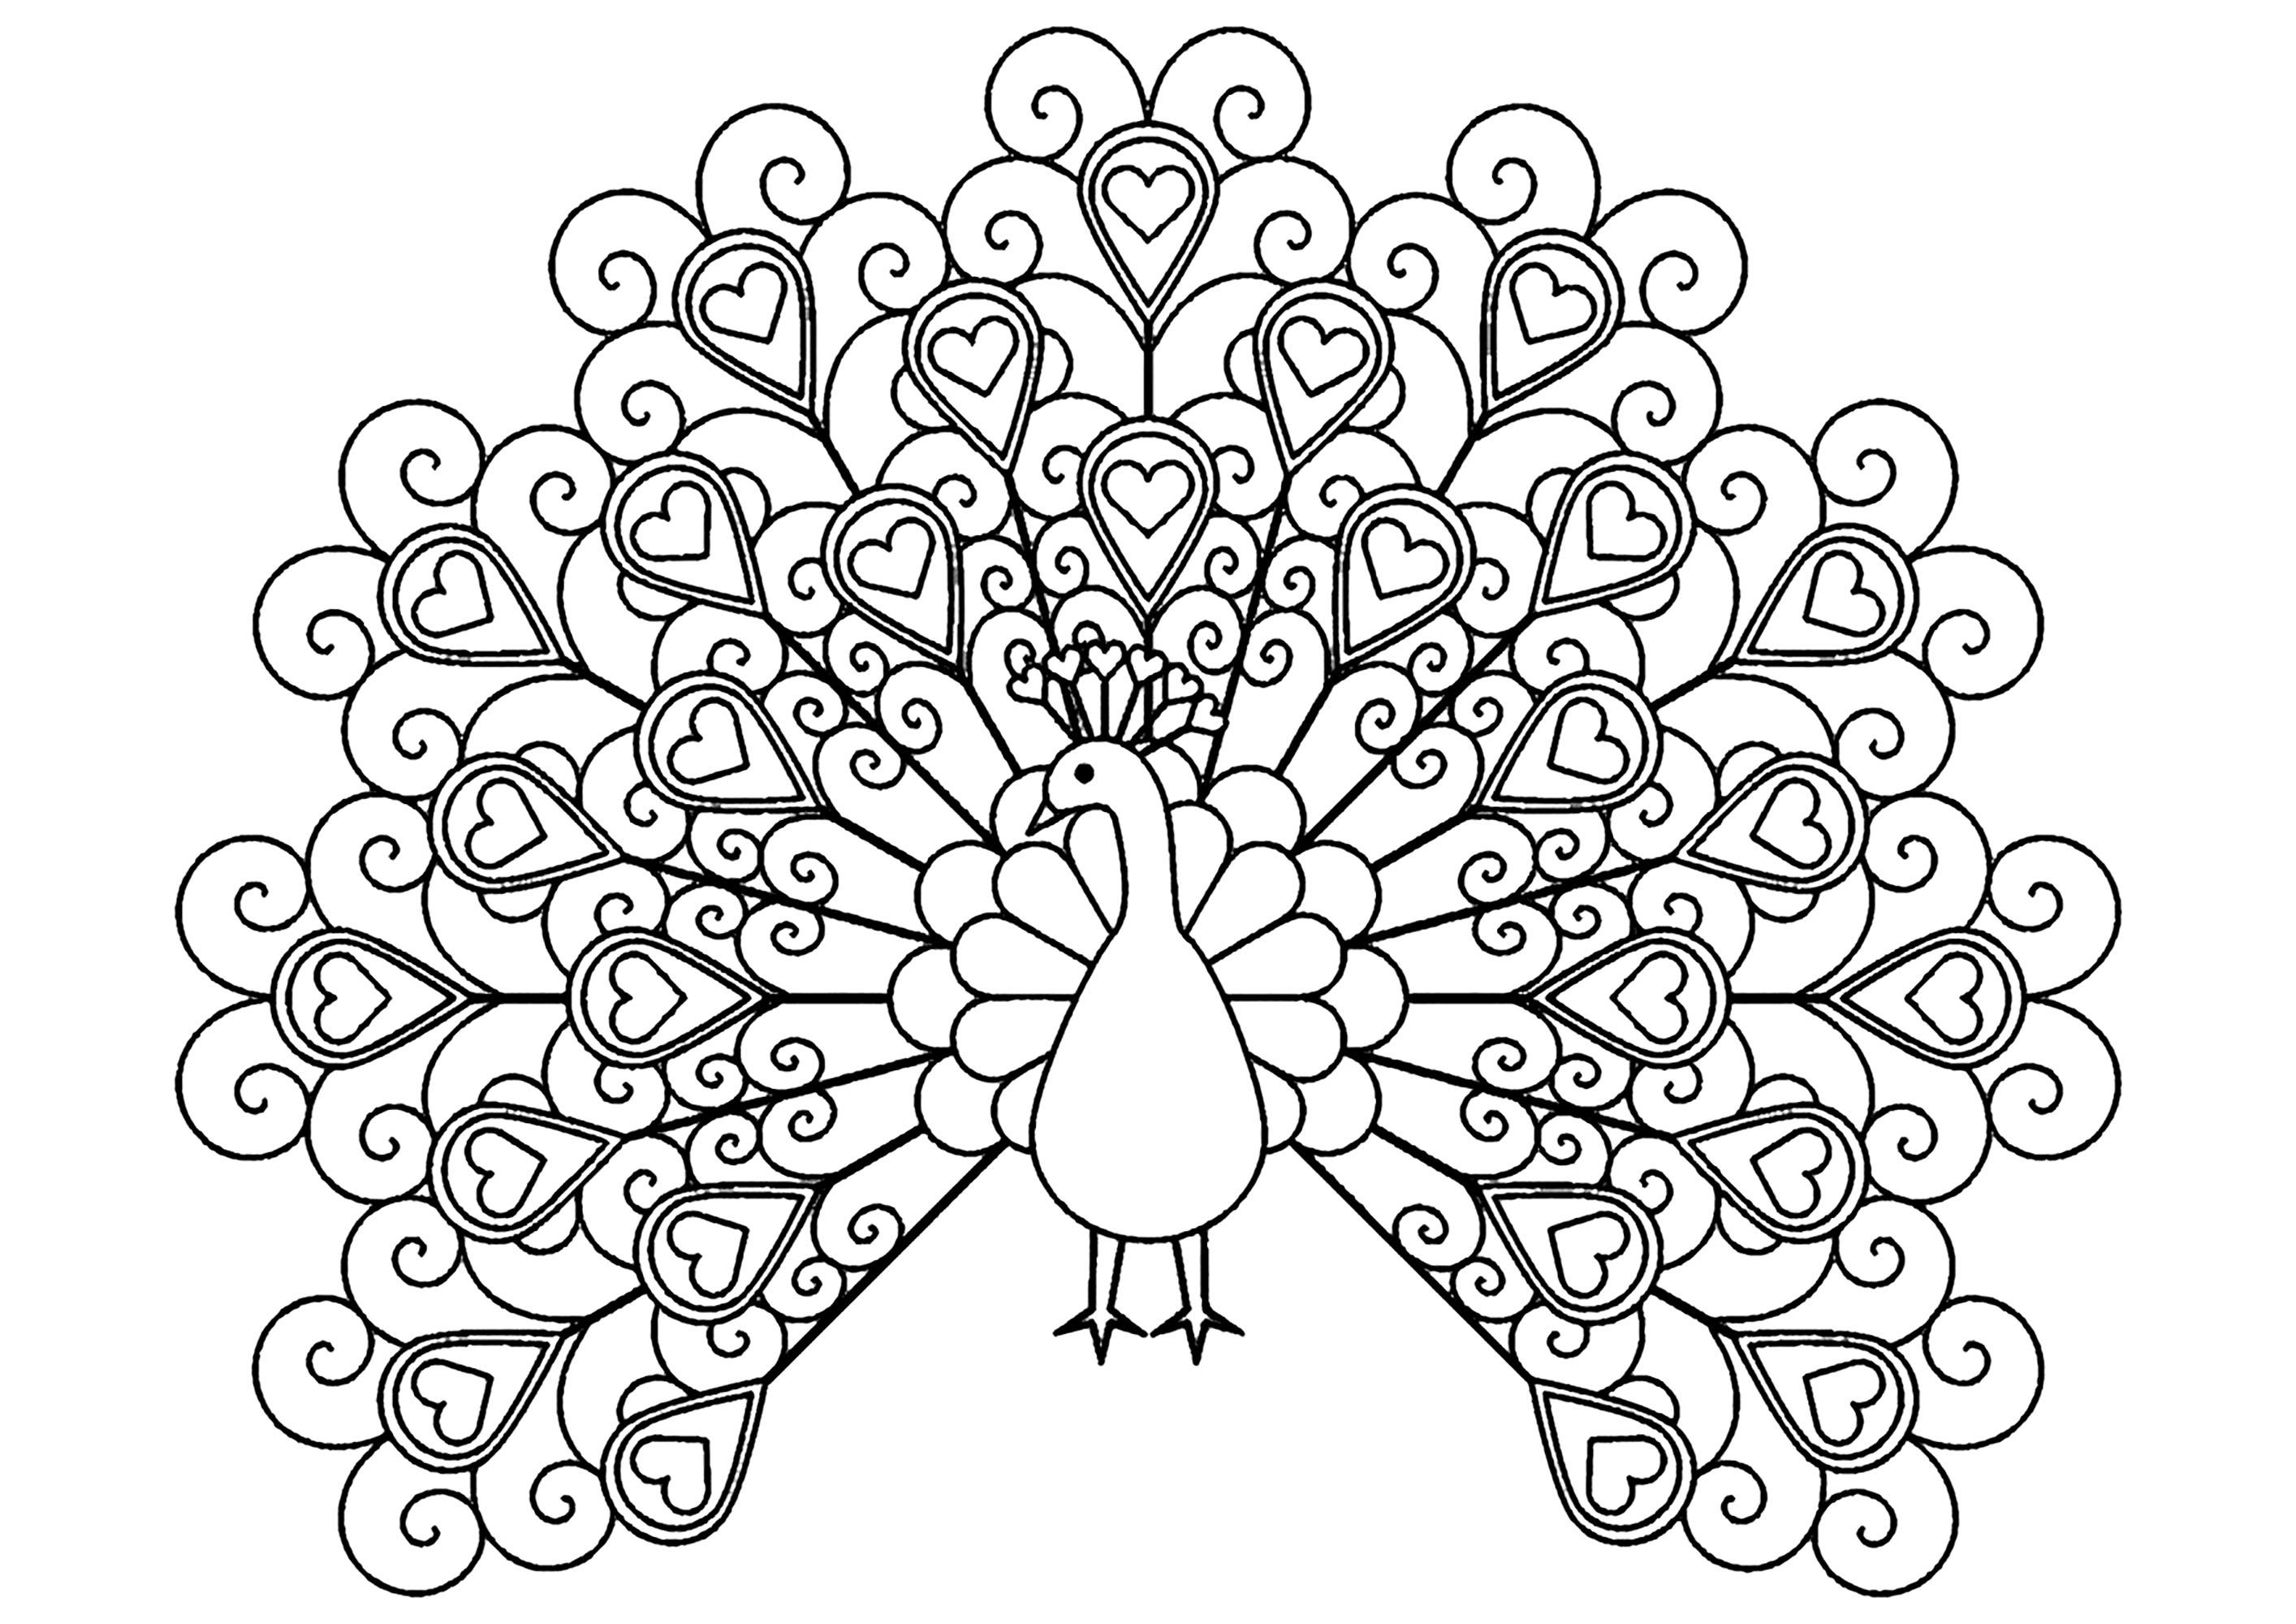 Simple coloring page of a peacock full of elegant hearts